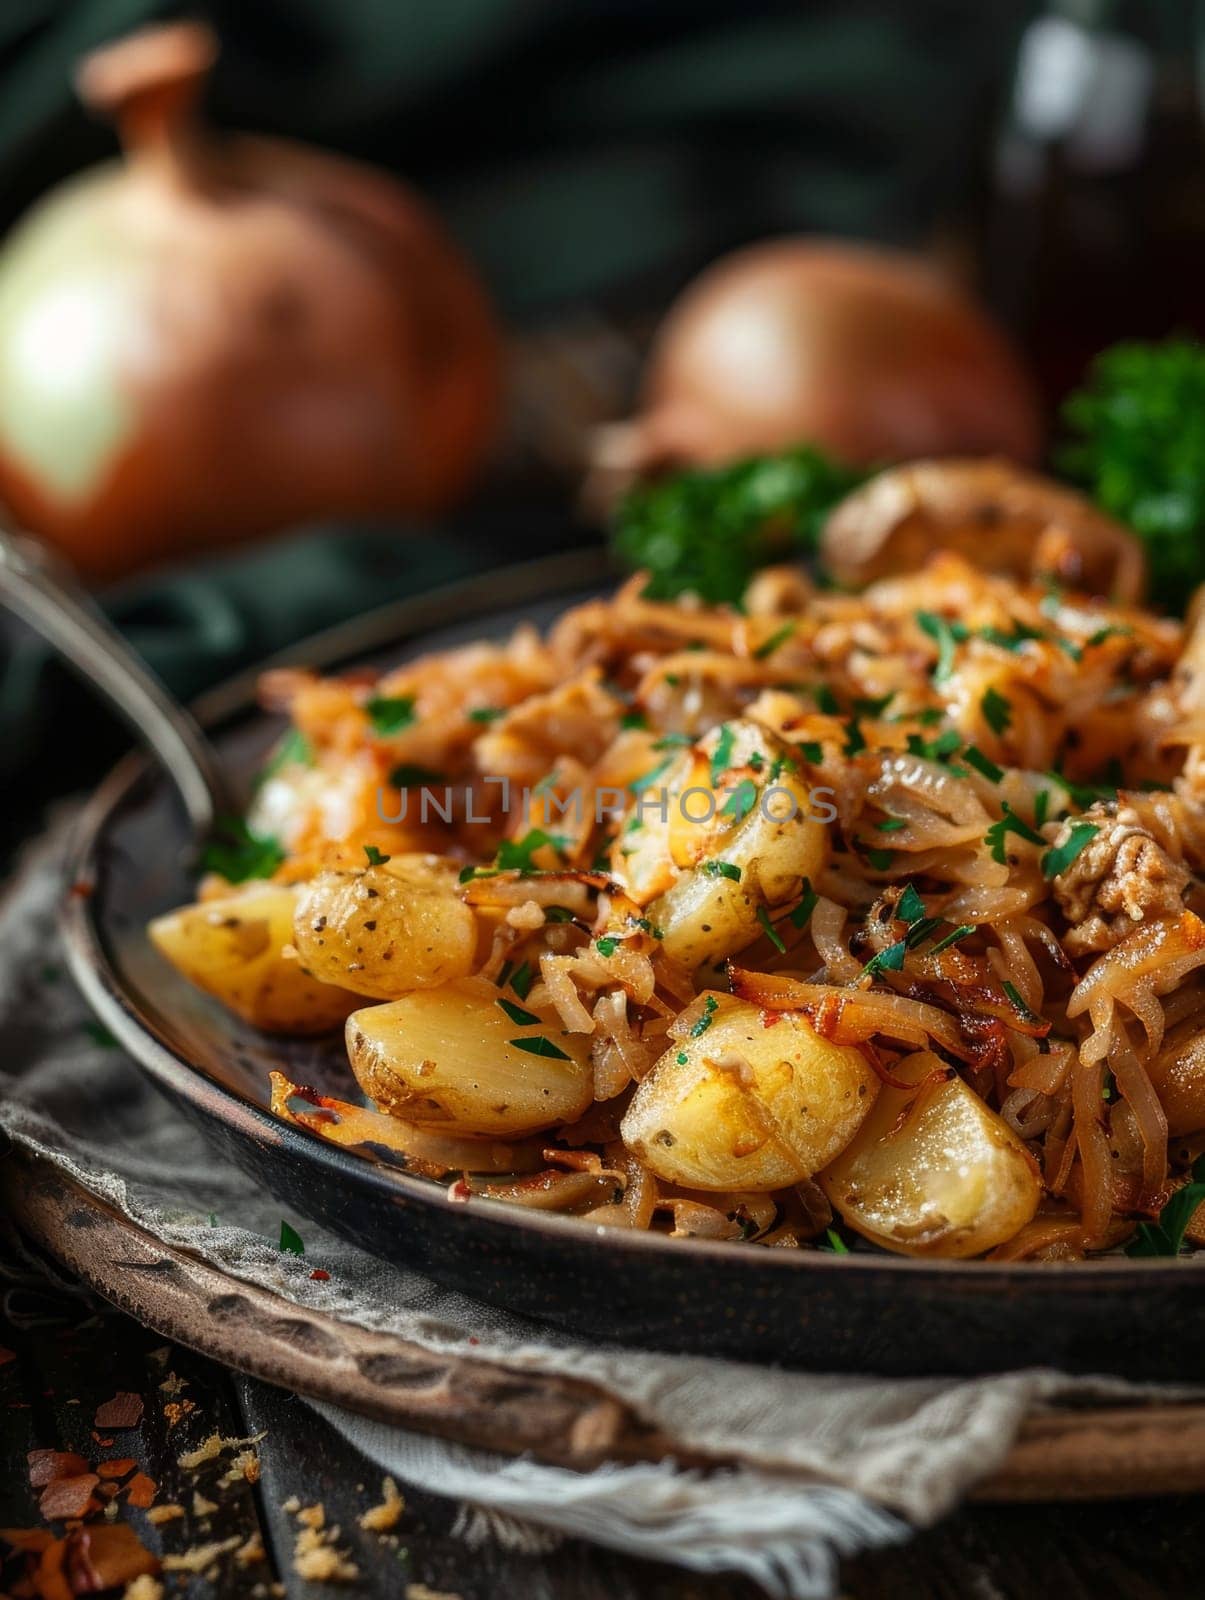 Portuguese bacalhau a bras on a plate, made with shredded salt cod, onions, and fried potatoes. A flavorful and traditional dish from Portugal